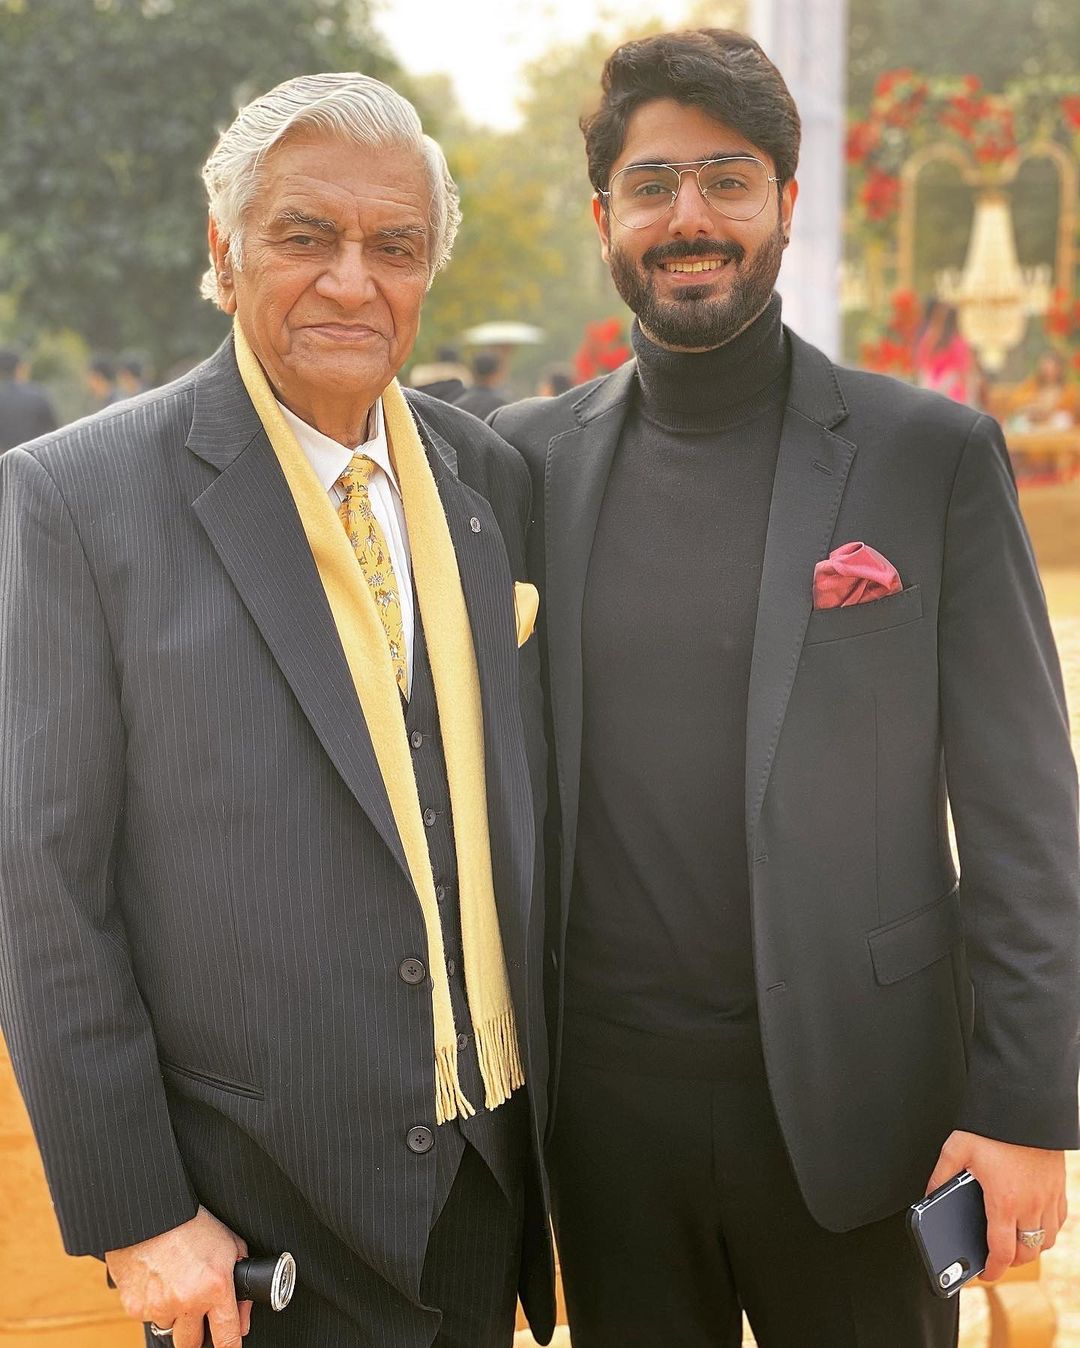 Actor Noman Ijaz Family Pictures from Relative Wedding